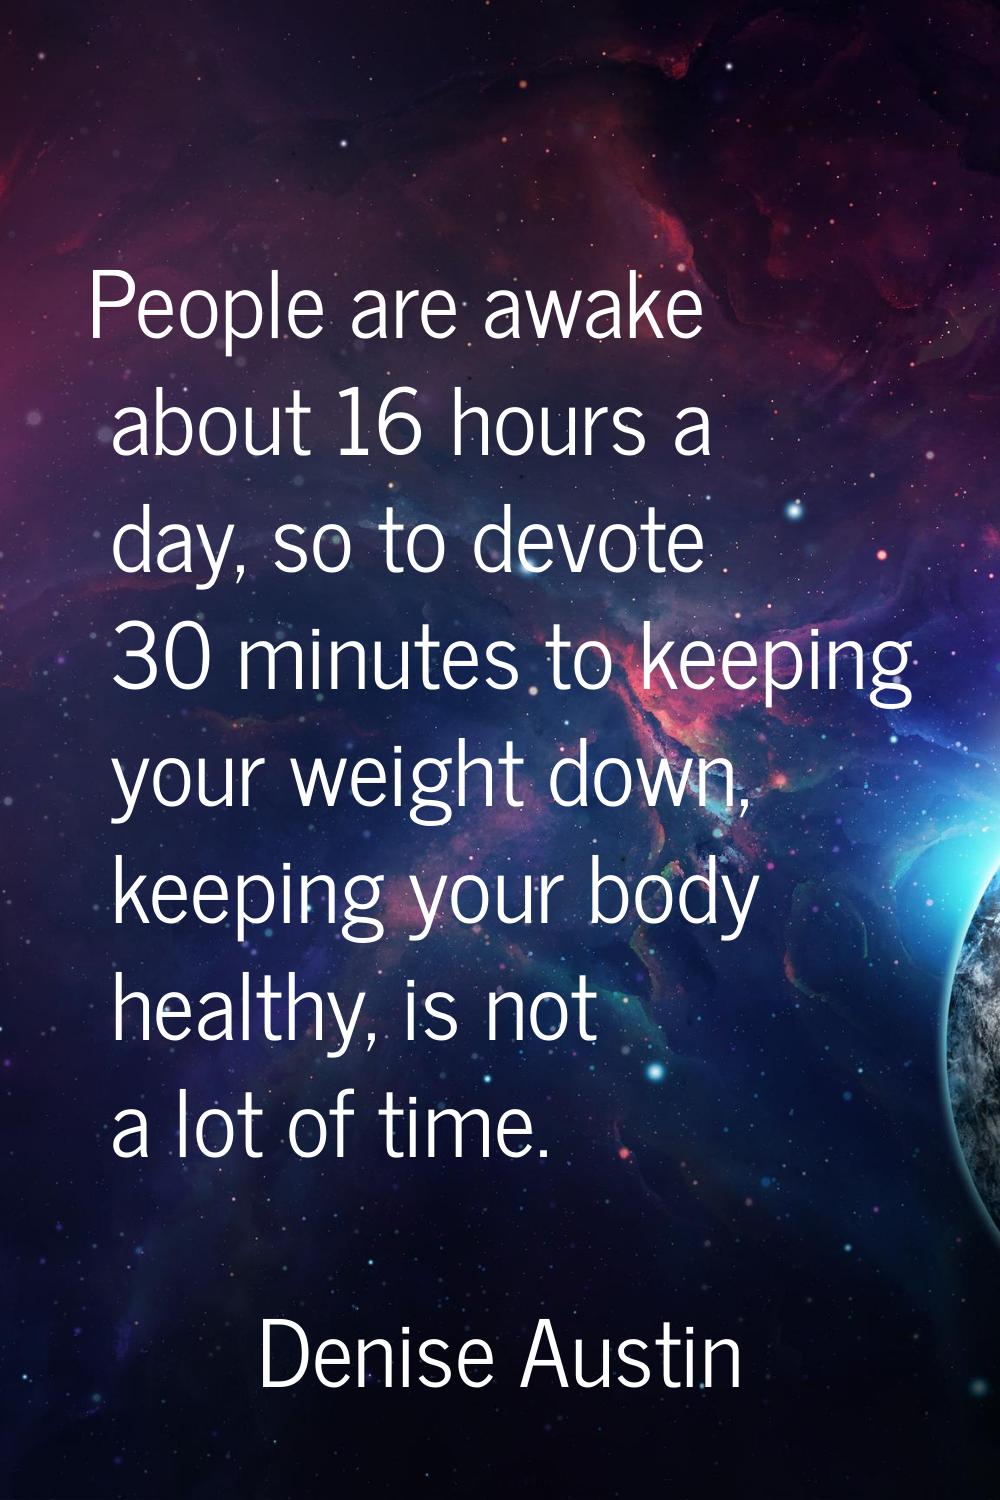 People are awake about 16 hours a day, so to devote 30 minutes to keeping your weight down, keeping